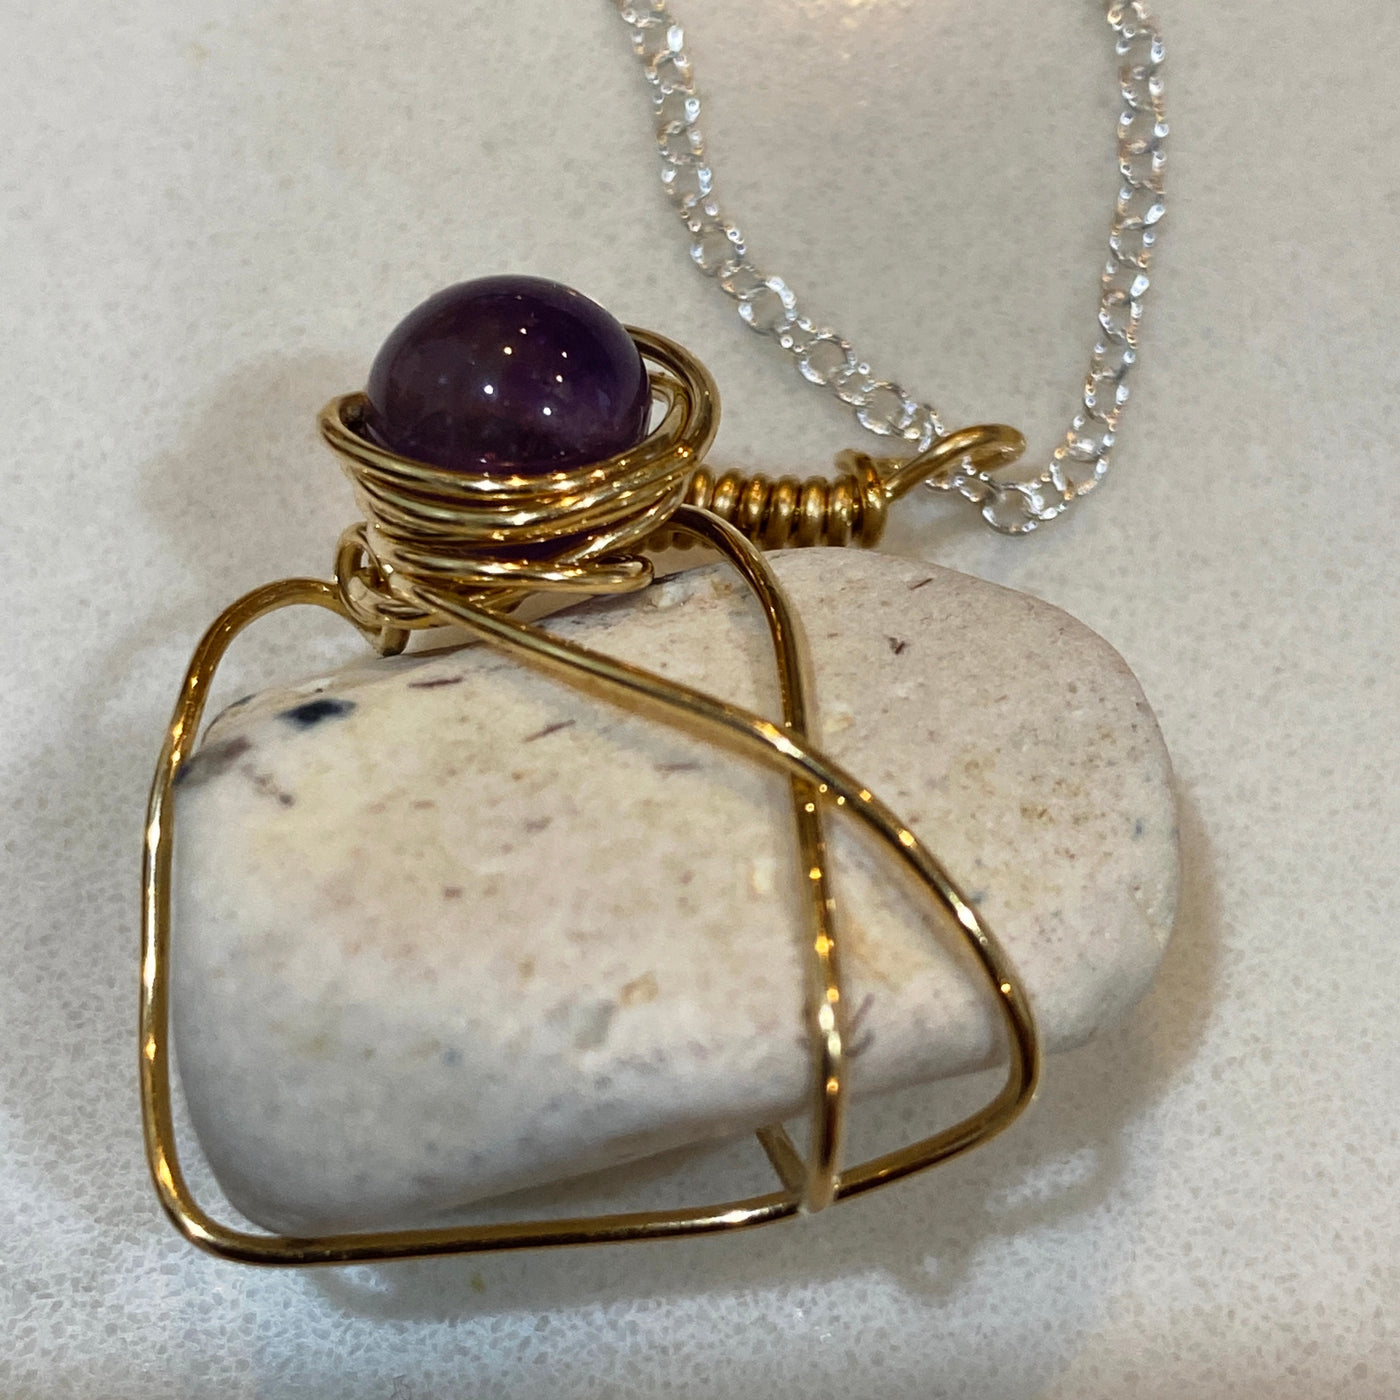 Small elegant pendant in white natural stone, amethist and wire on silver chain.